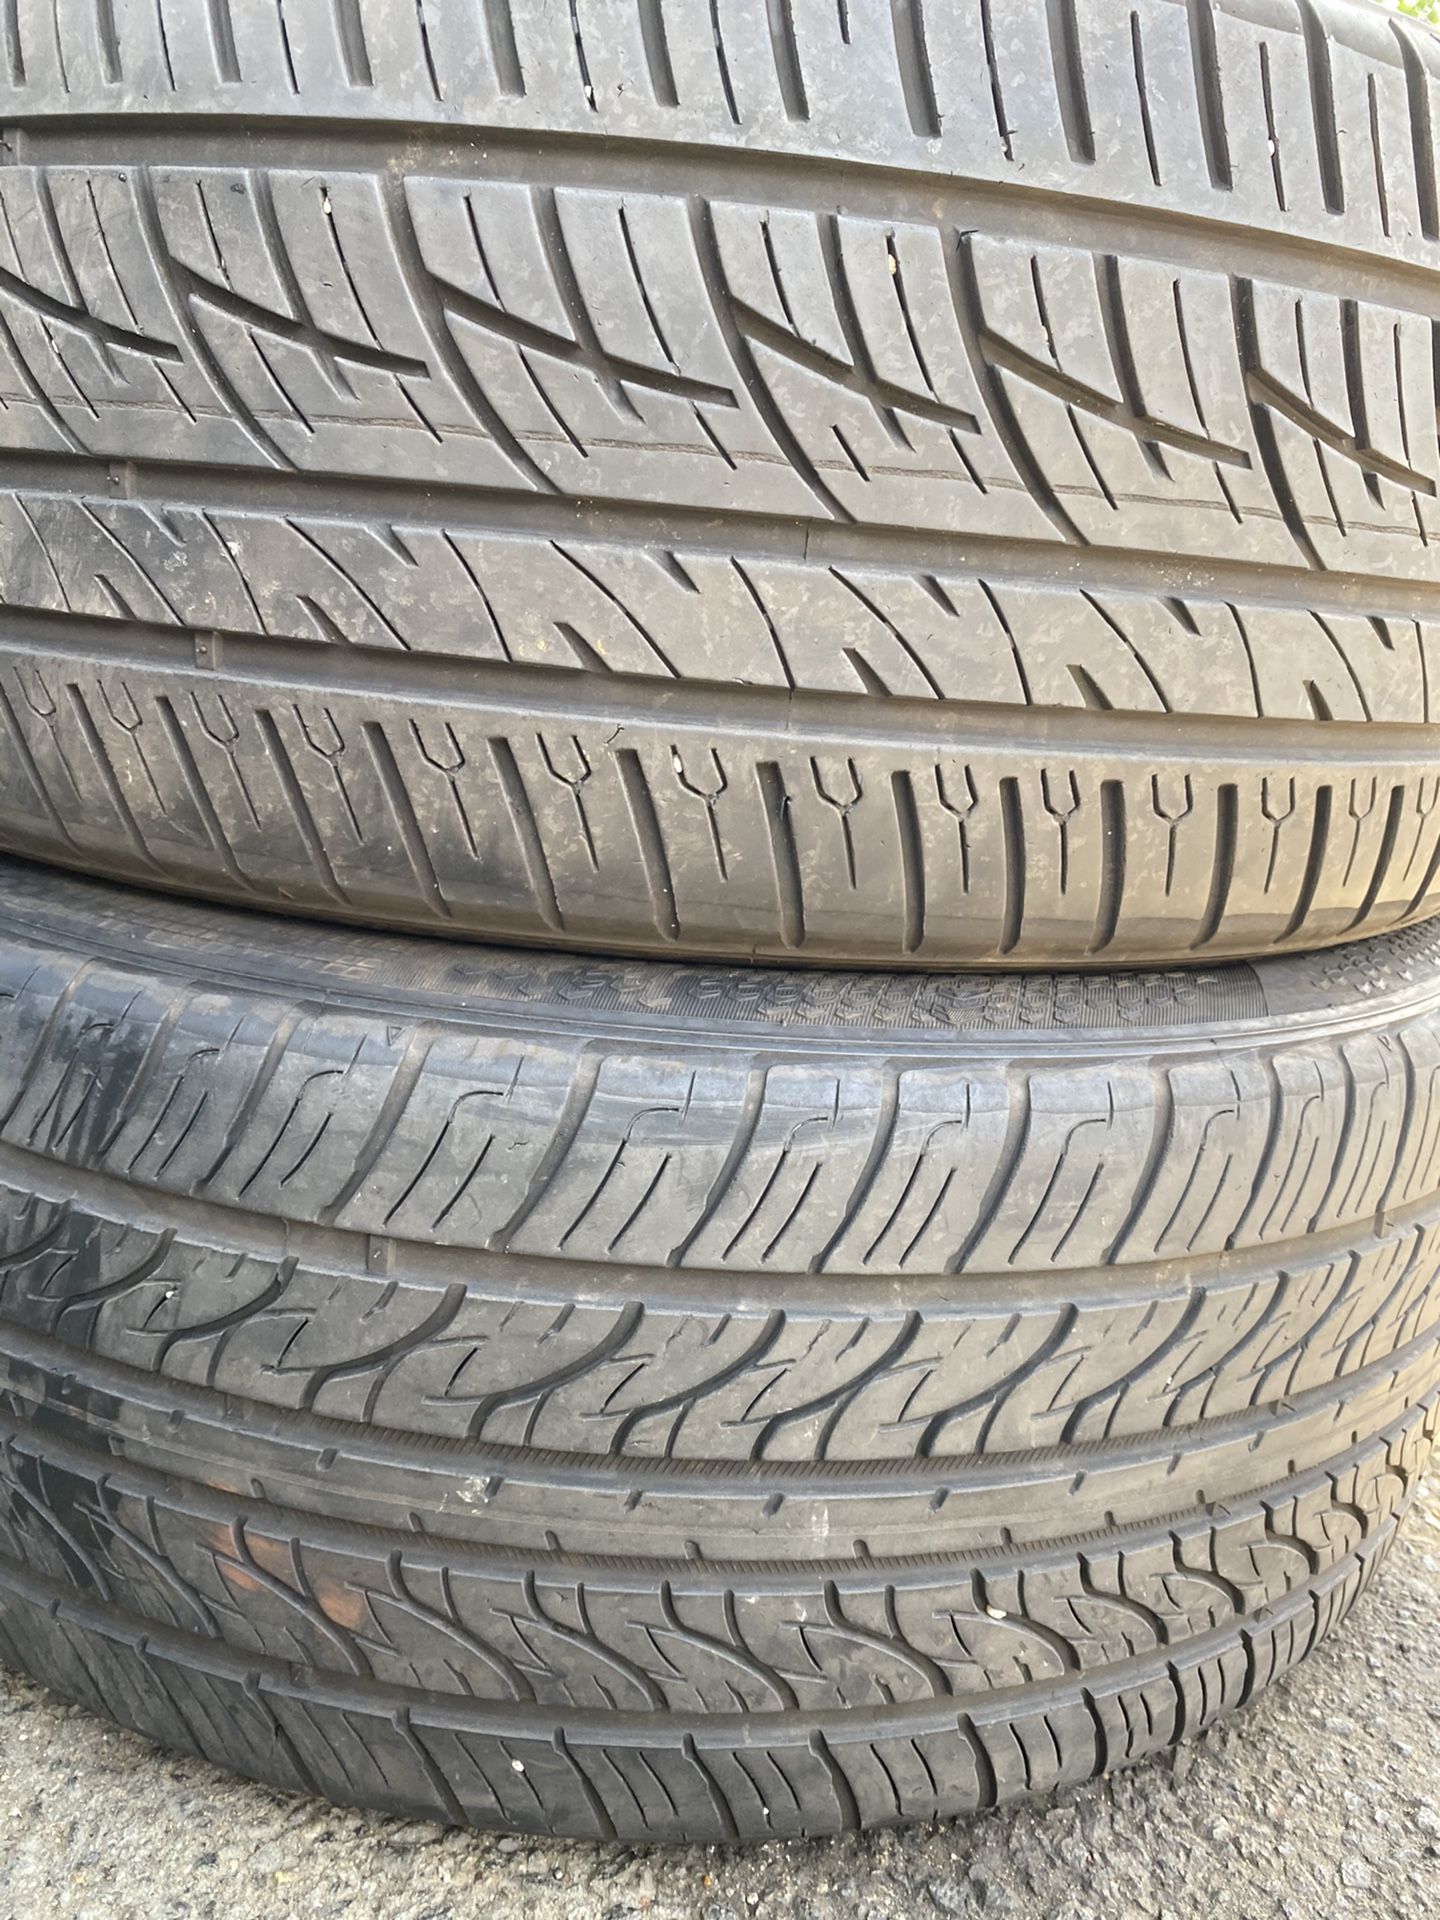 Two used tire 245/45R20 DELINTE end VERCELLI two used tire $90